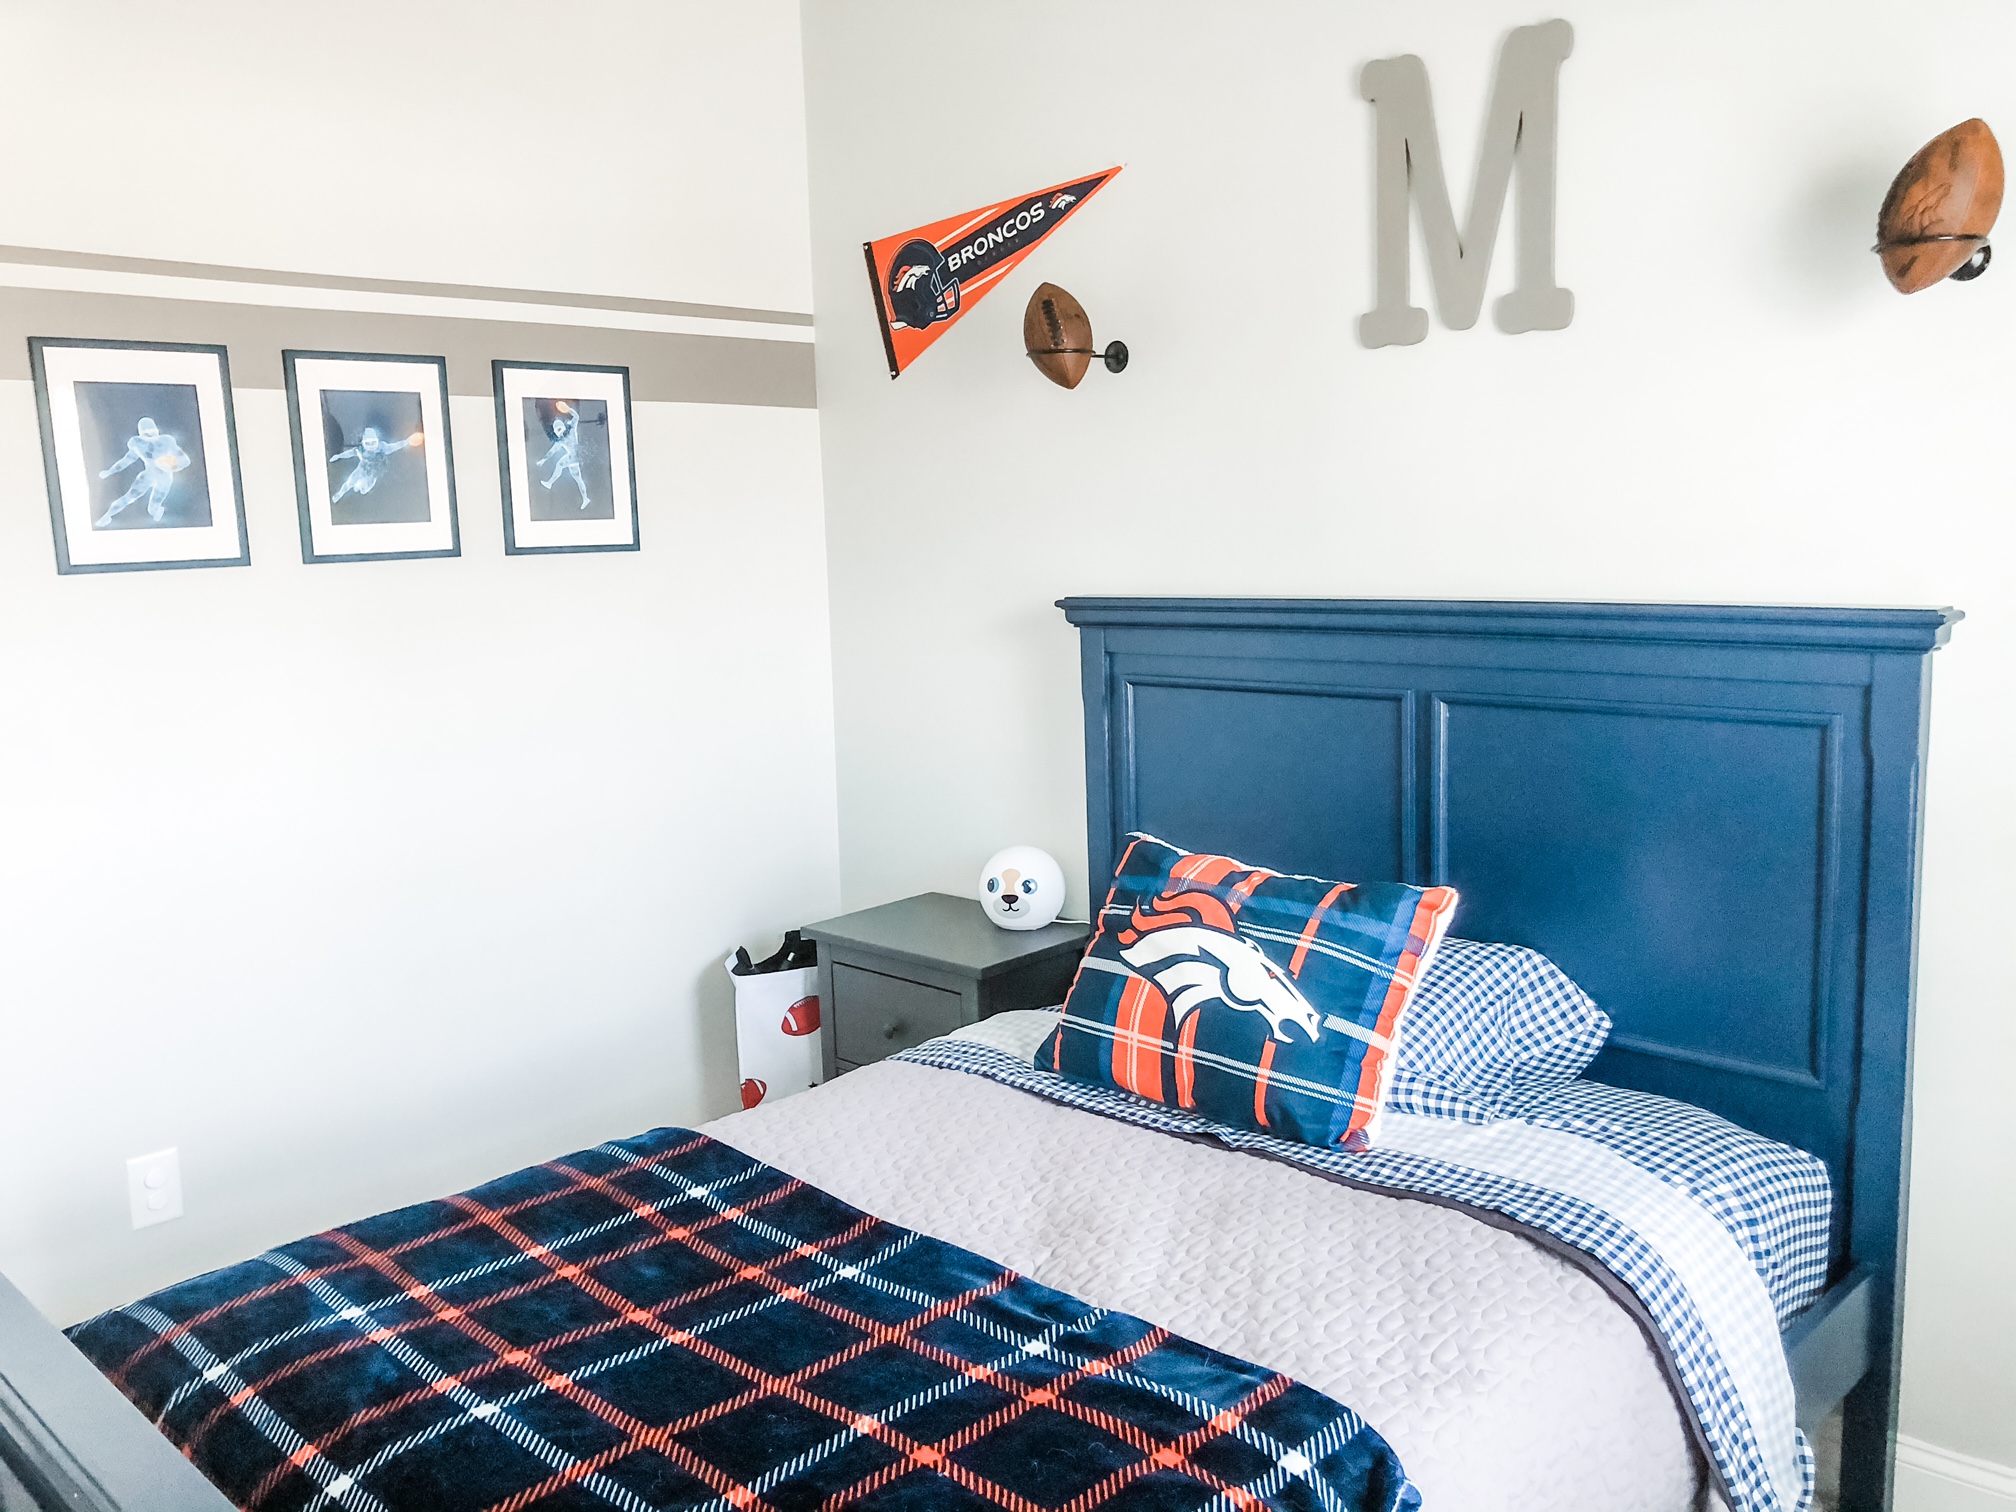 Simple design for a Boy's Sport Themed Room! - The Mommy Project Guru